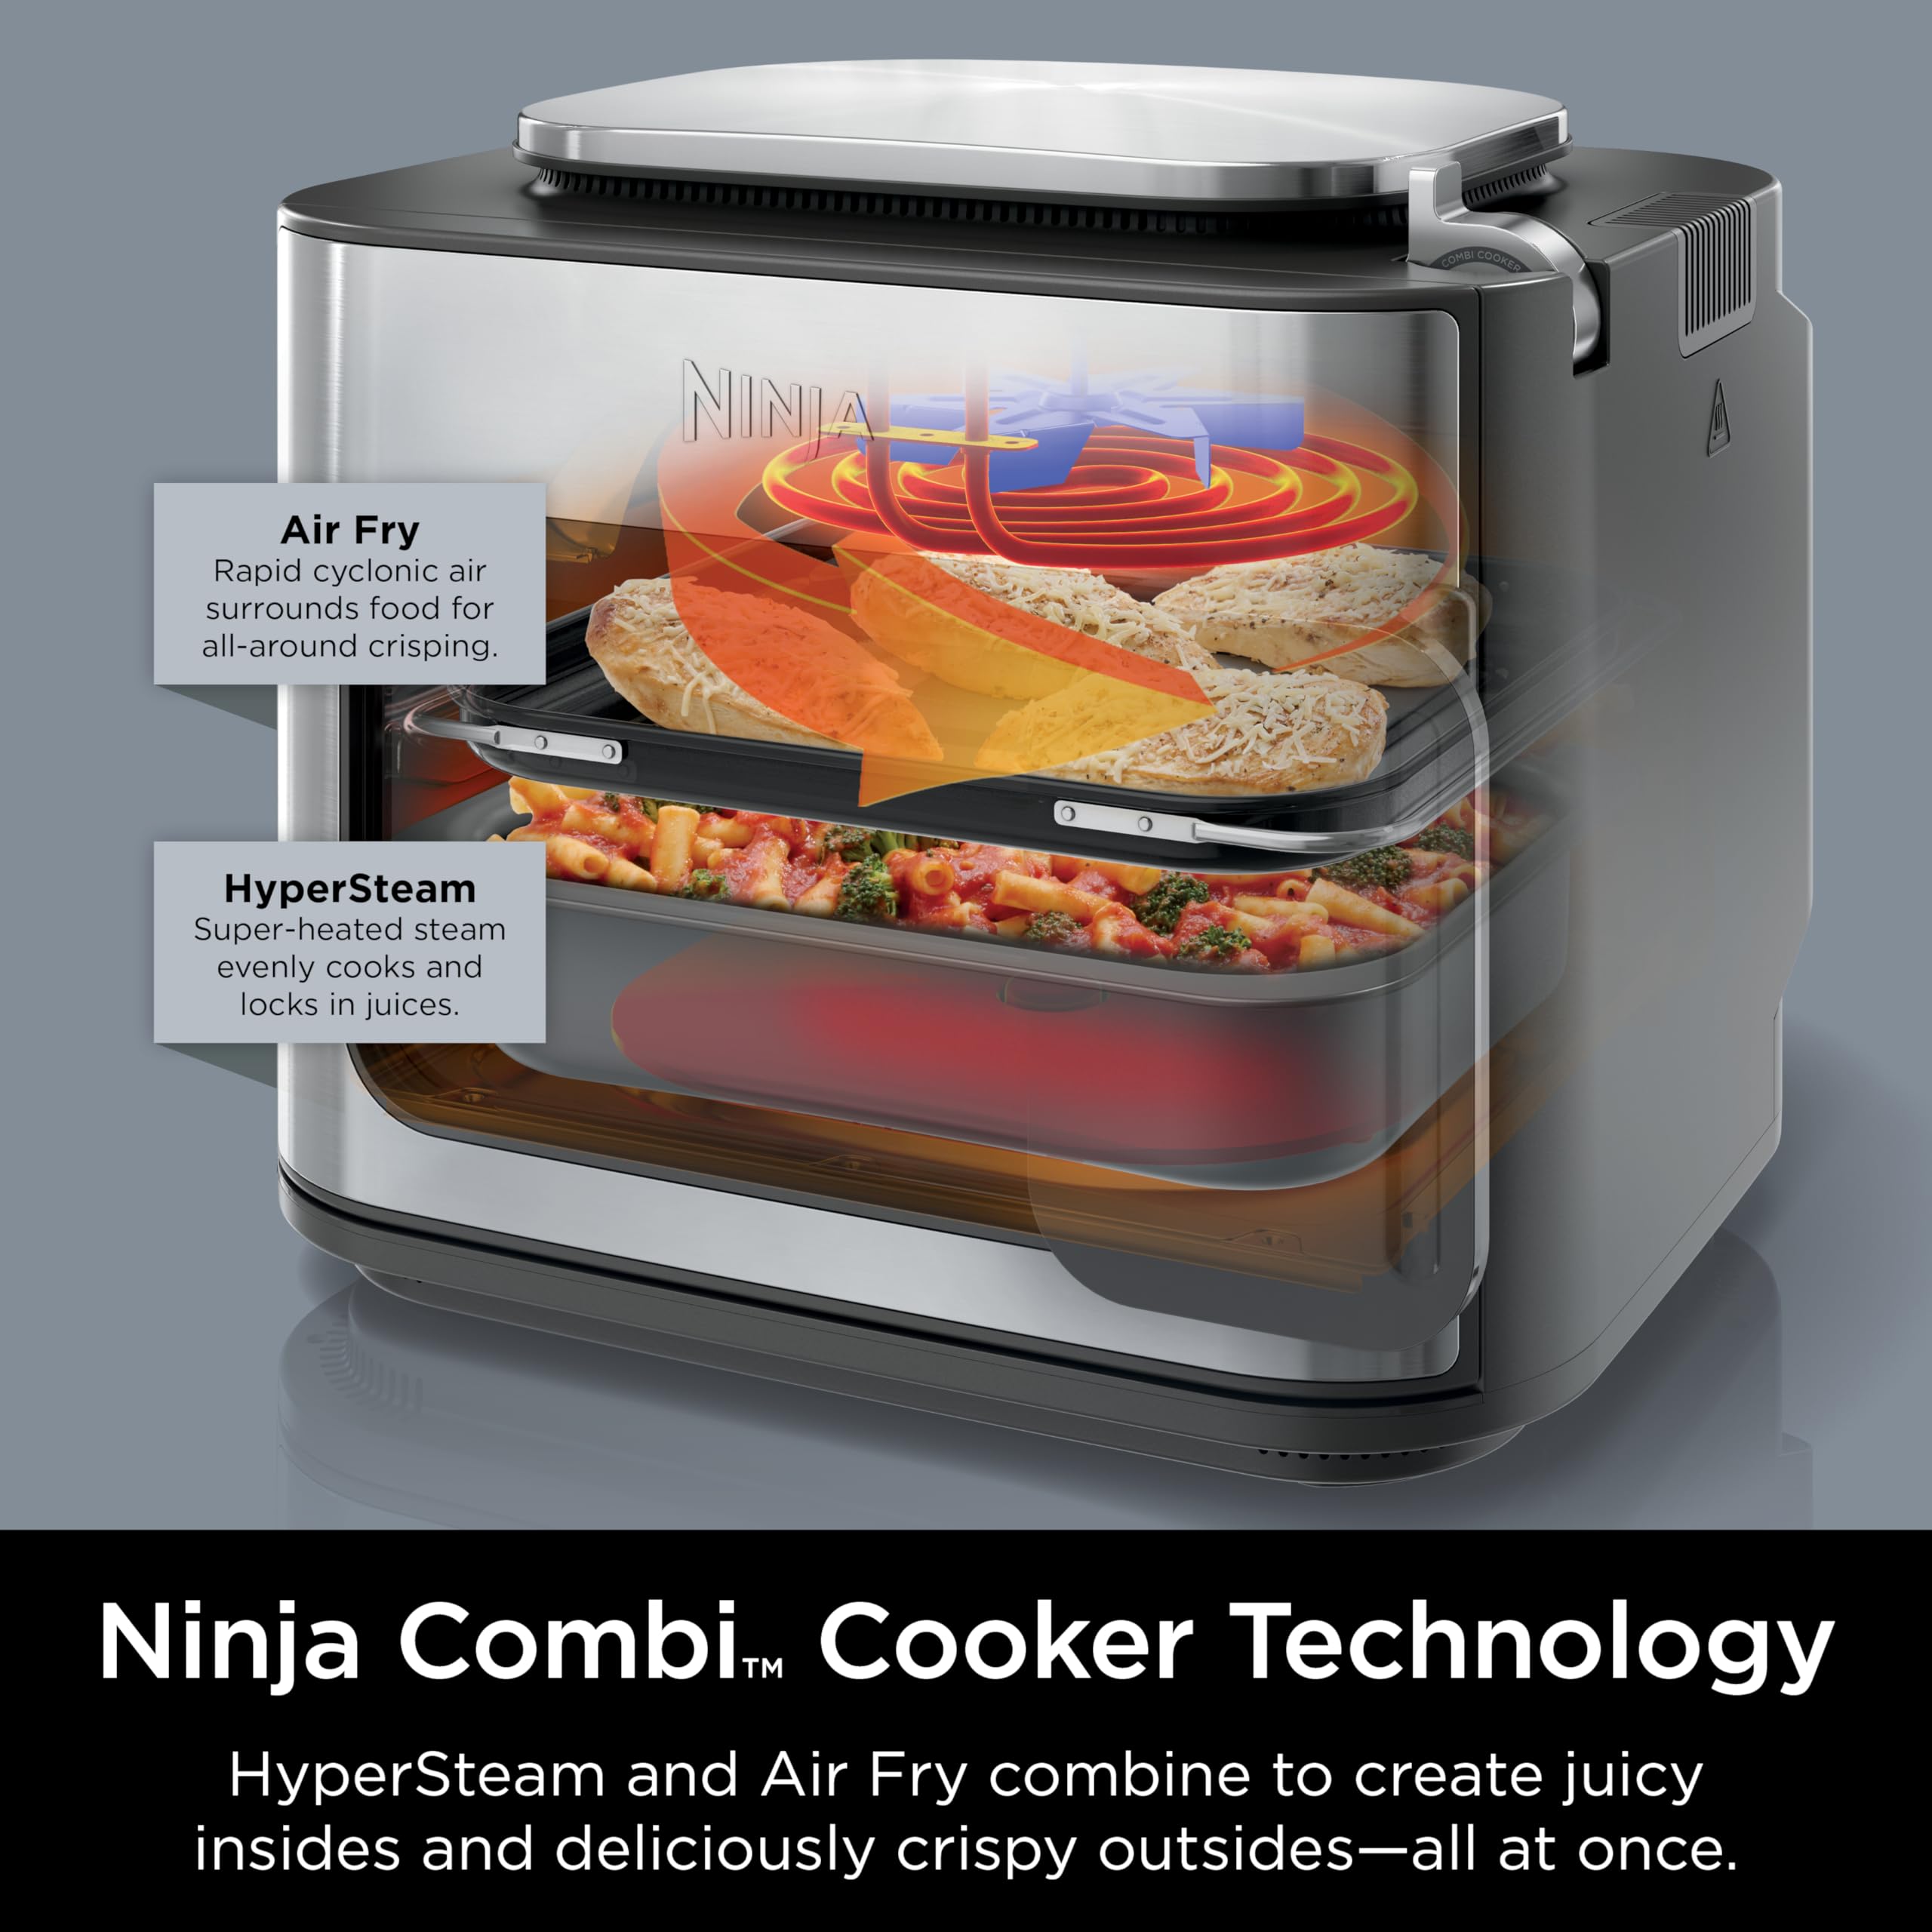 Ninja SFP701 Combi All-in-One Multicooker, Oven, and Air Fryer, 14-in-1 Functions, 15-Minute Complete Meals, Includes 3 Accessories, Grey, 14.92 x 15.43 x 13.11